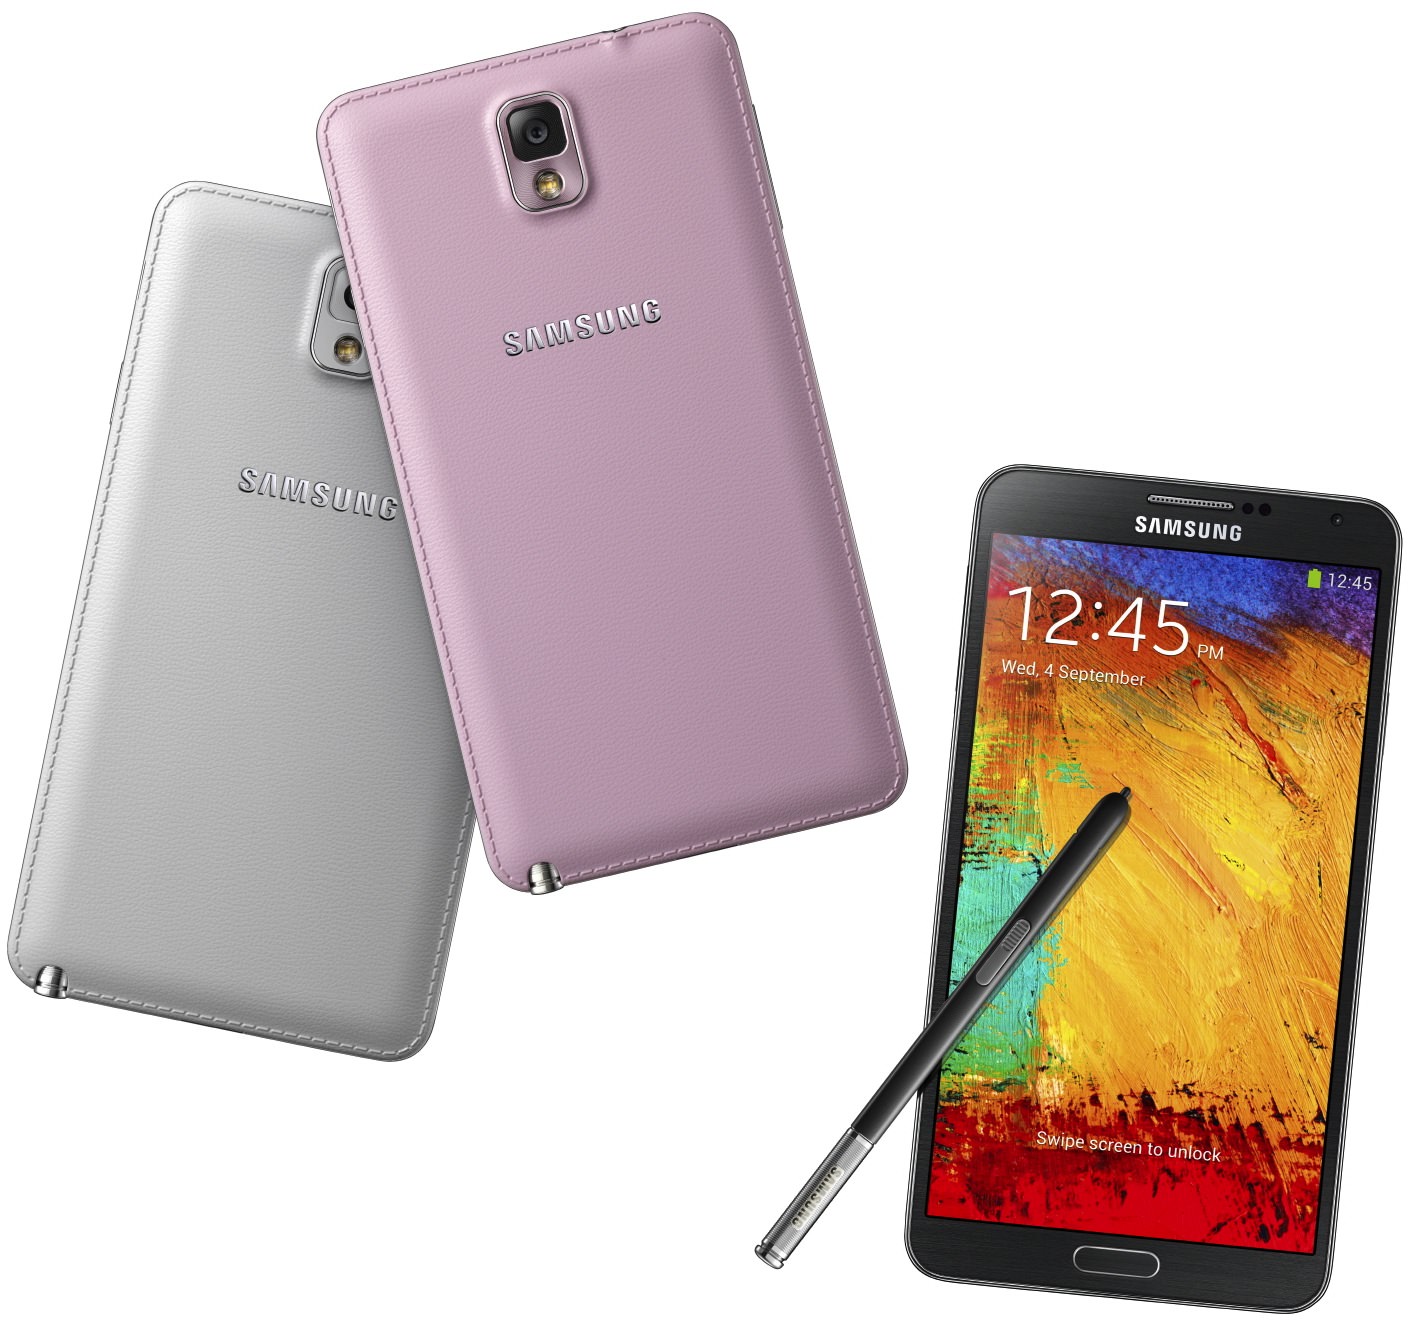 galaxy note 2 versus galaxy note 3 les specifications 1